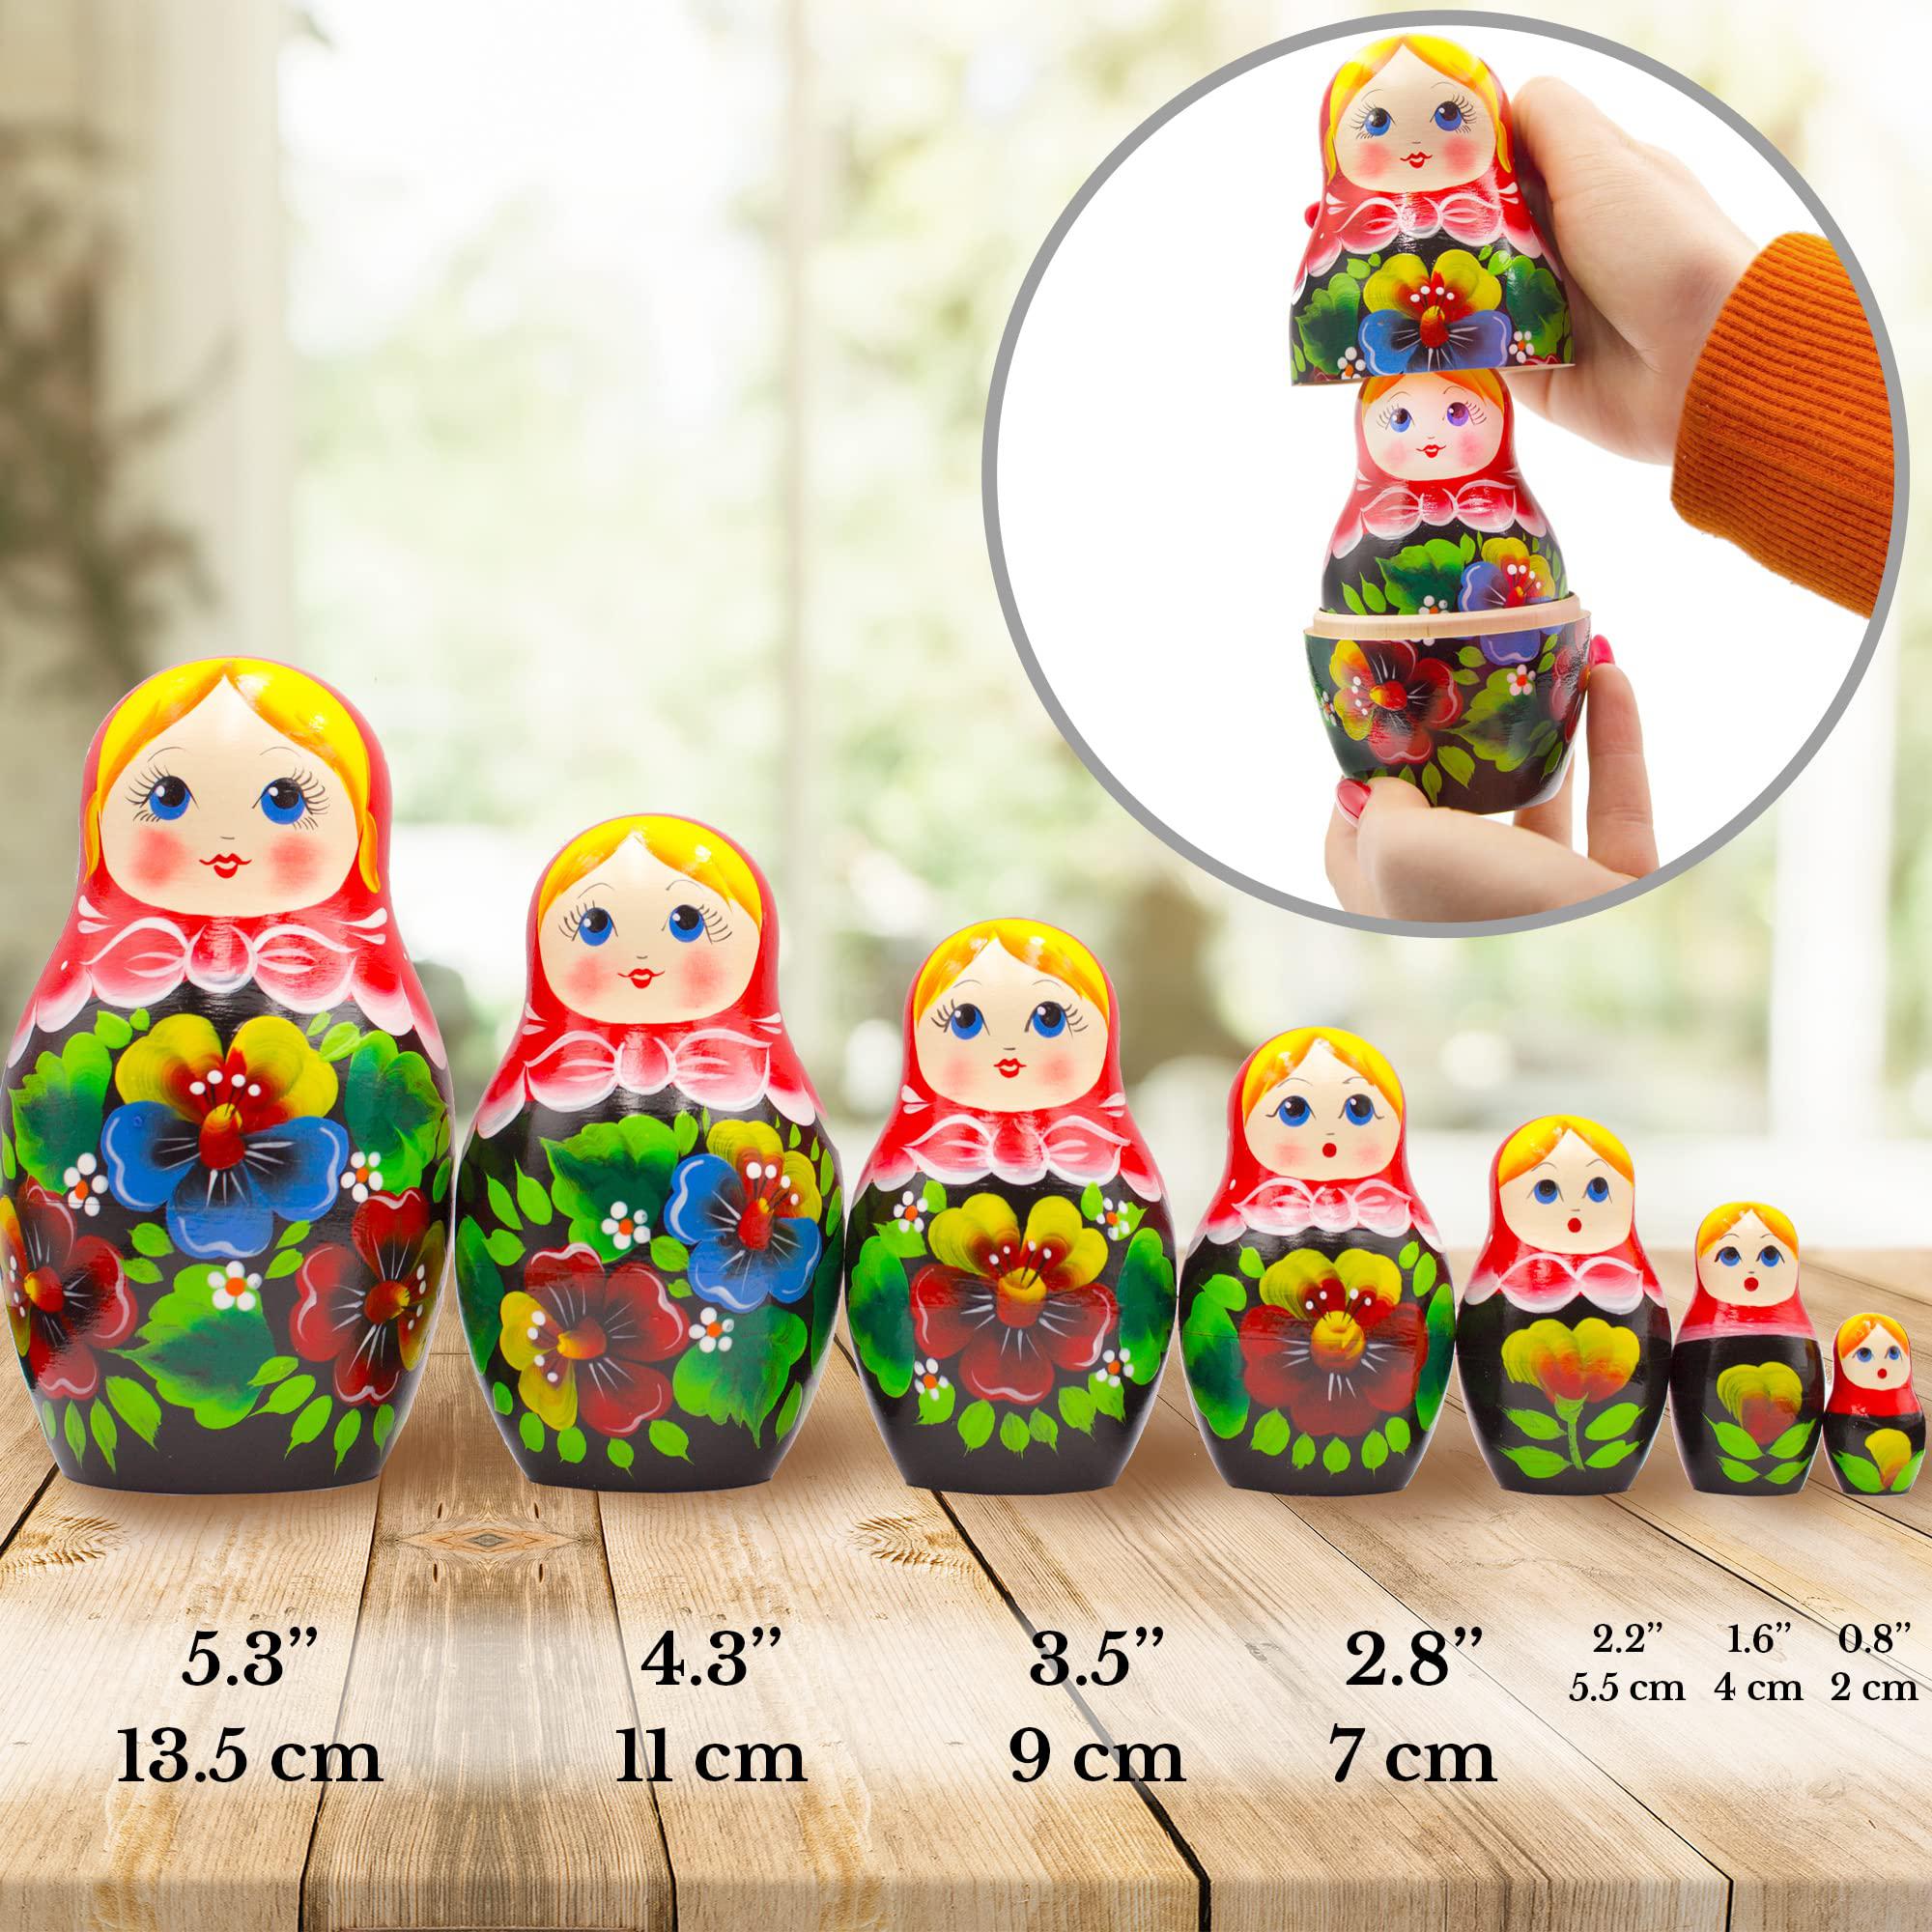 aevvv russian nesting dolls set of 7 pcs - matryoshka dolls in red head scarf and sarafan dress with pansy flowers - handmade